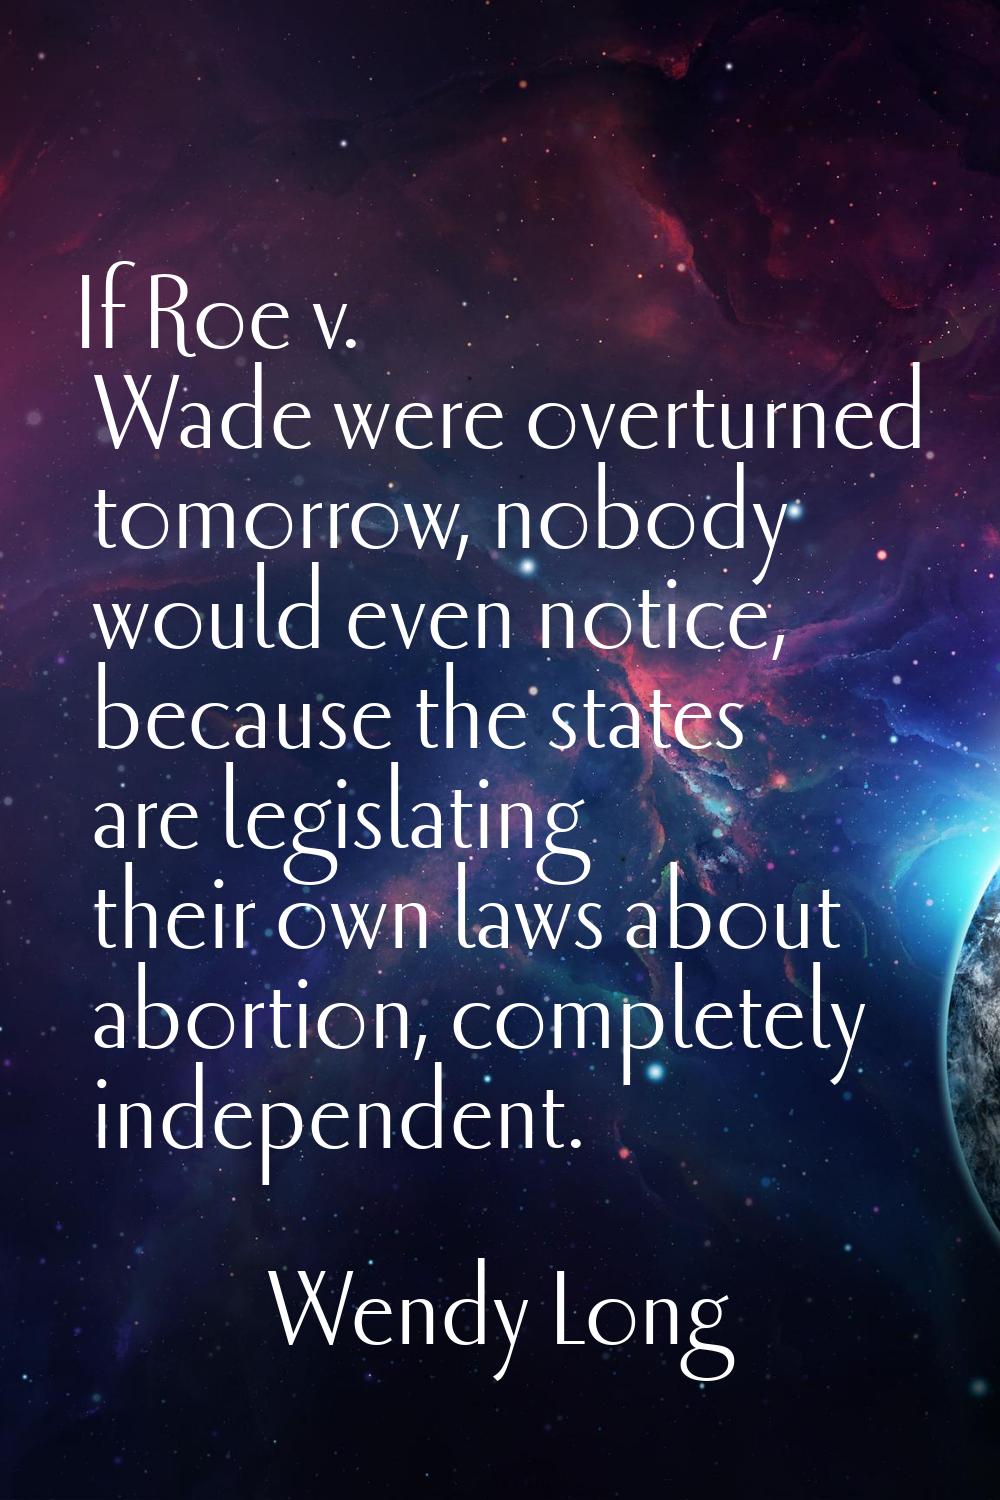 If Roe v. Wade were overturned tomorrow, nobody would even notice, because the states are legislati